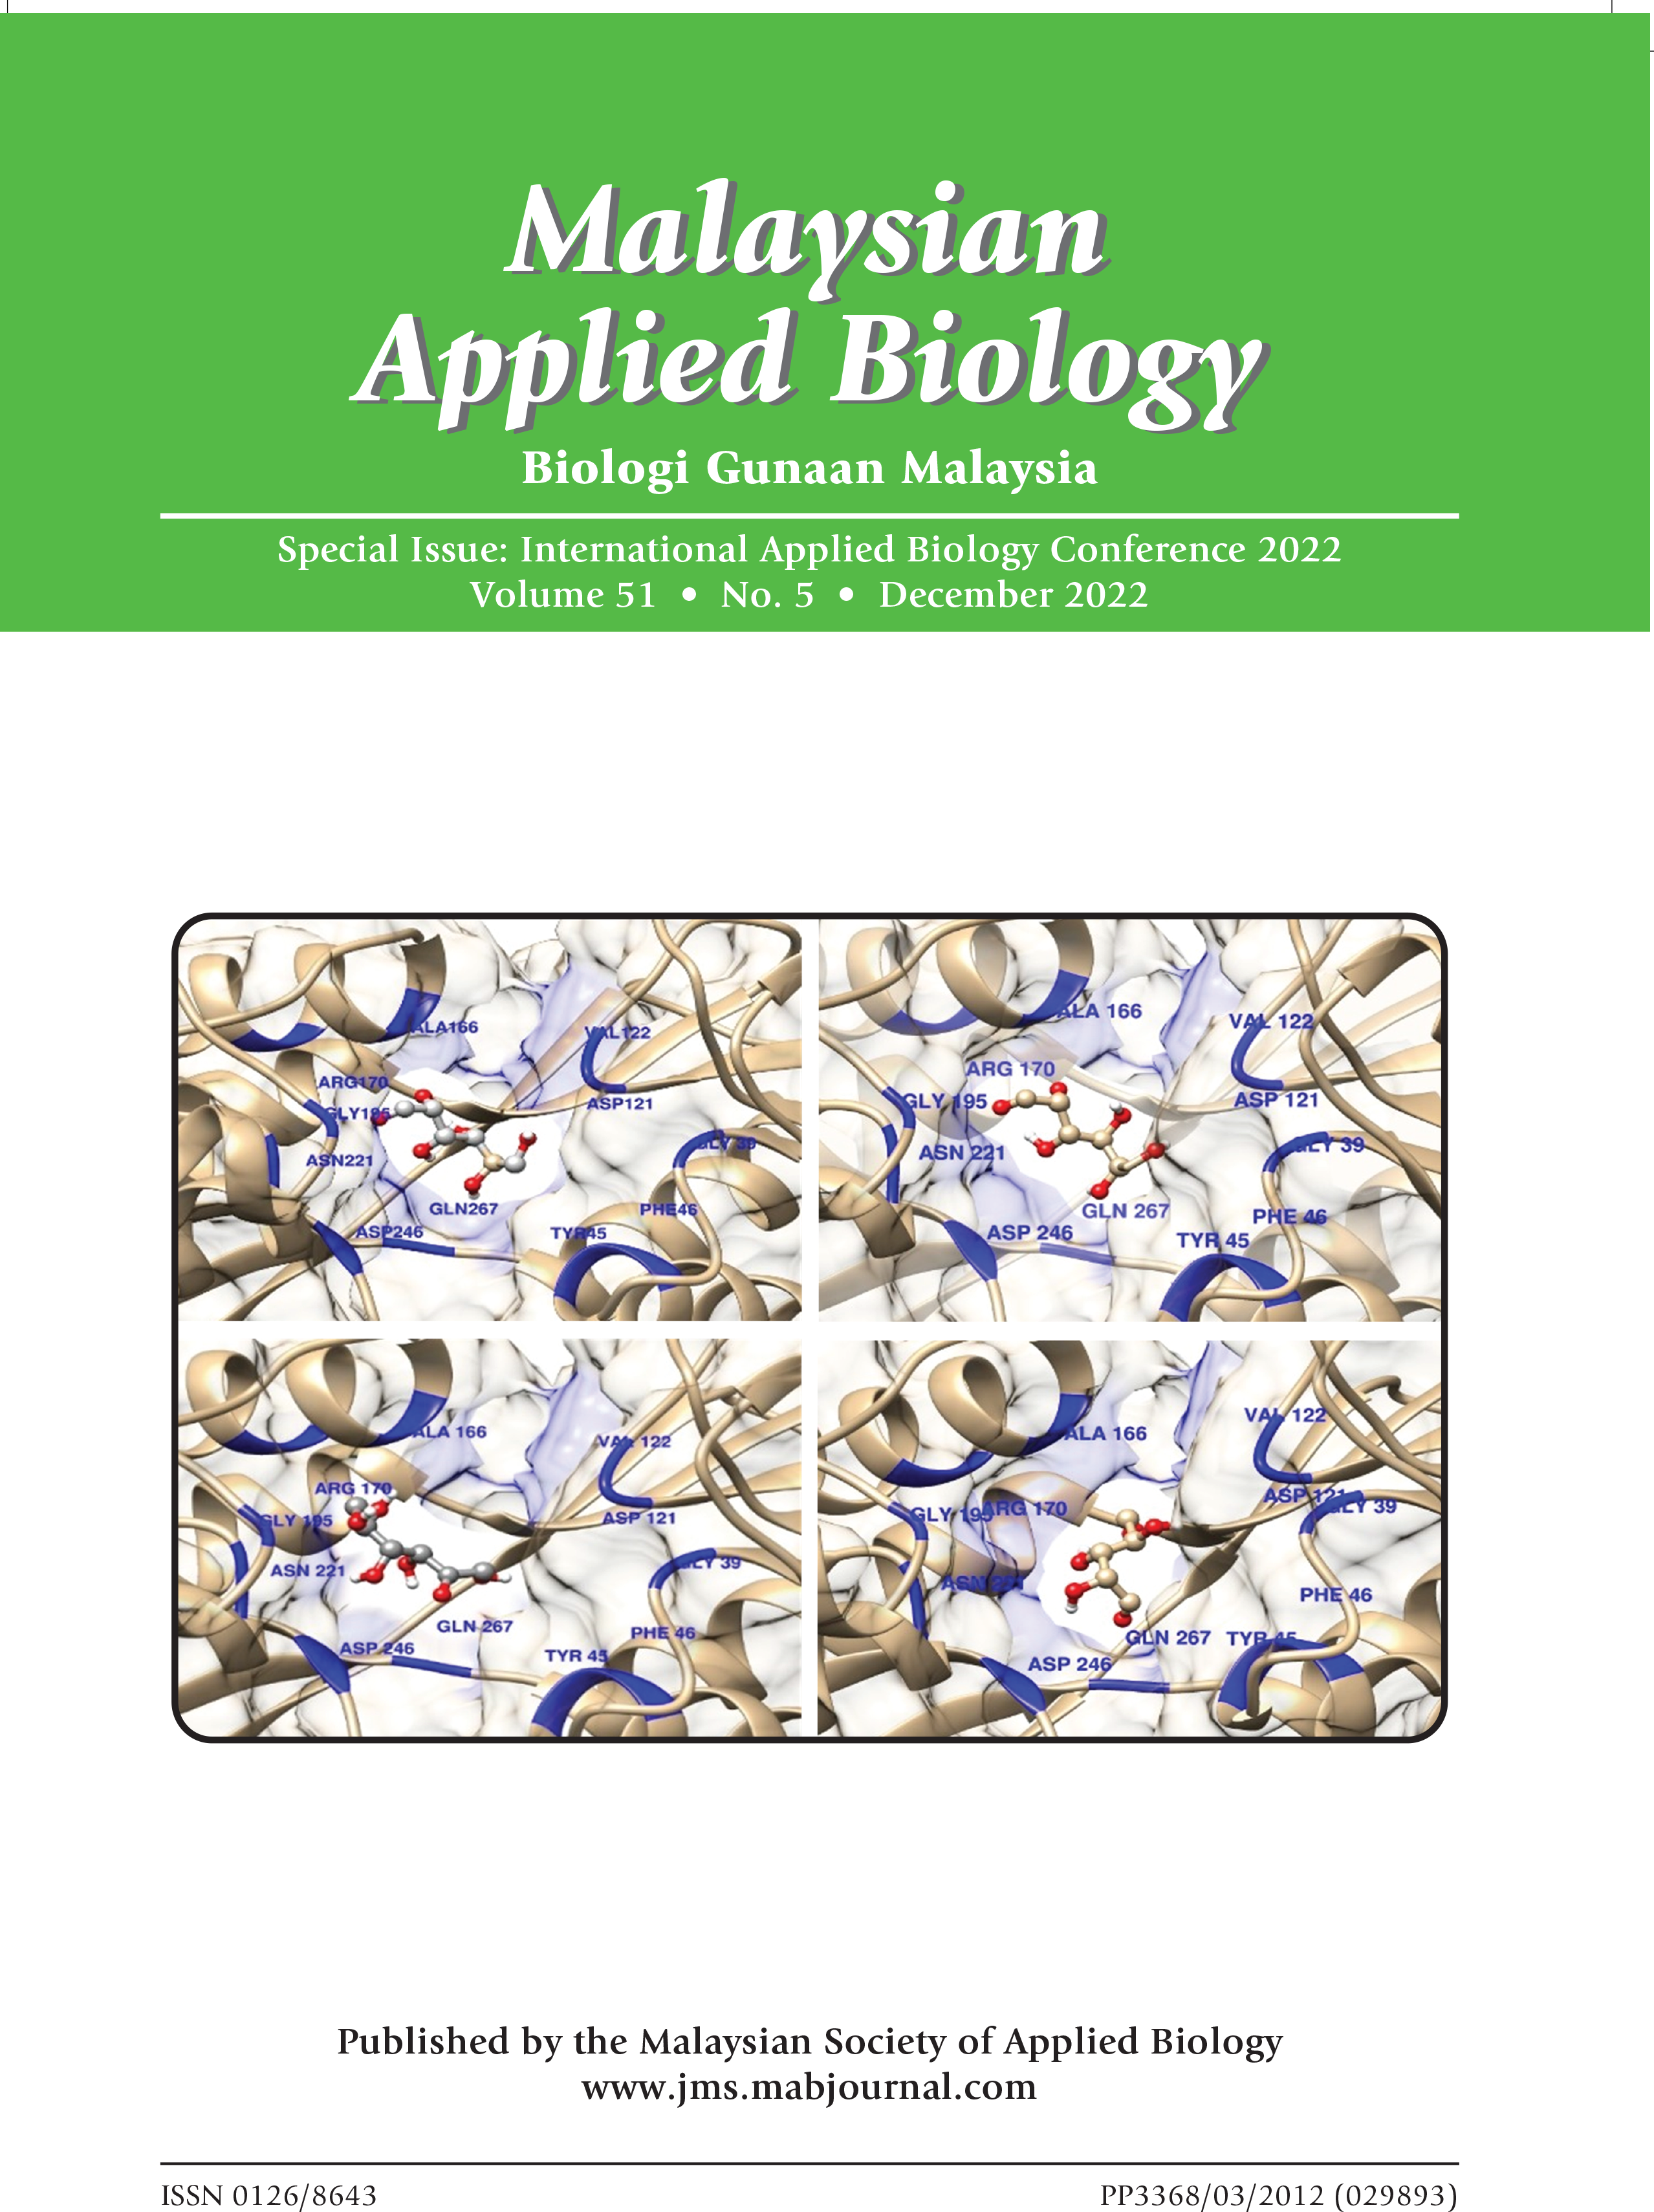 					View Vol. 51 No. 5 (2022): International Applied Biology Conference 2022 (Special Issue)
				